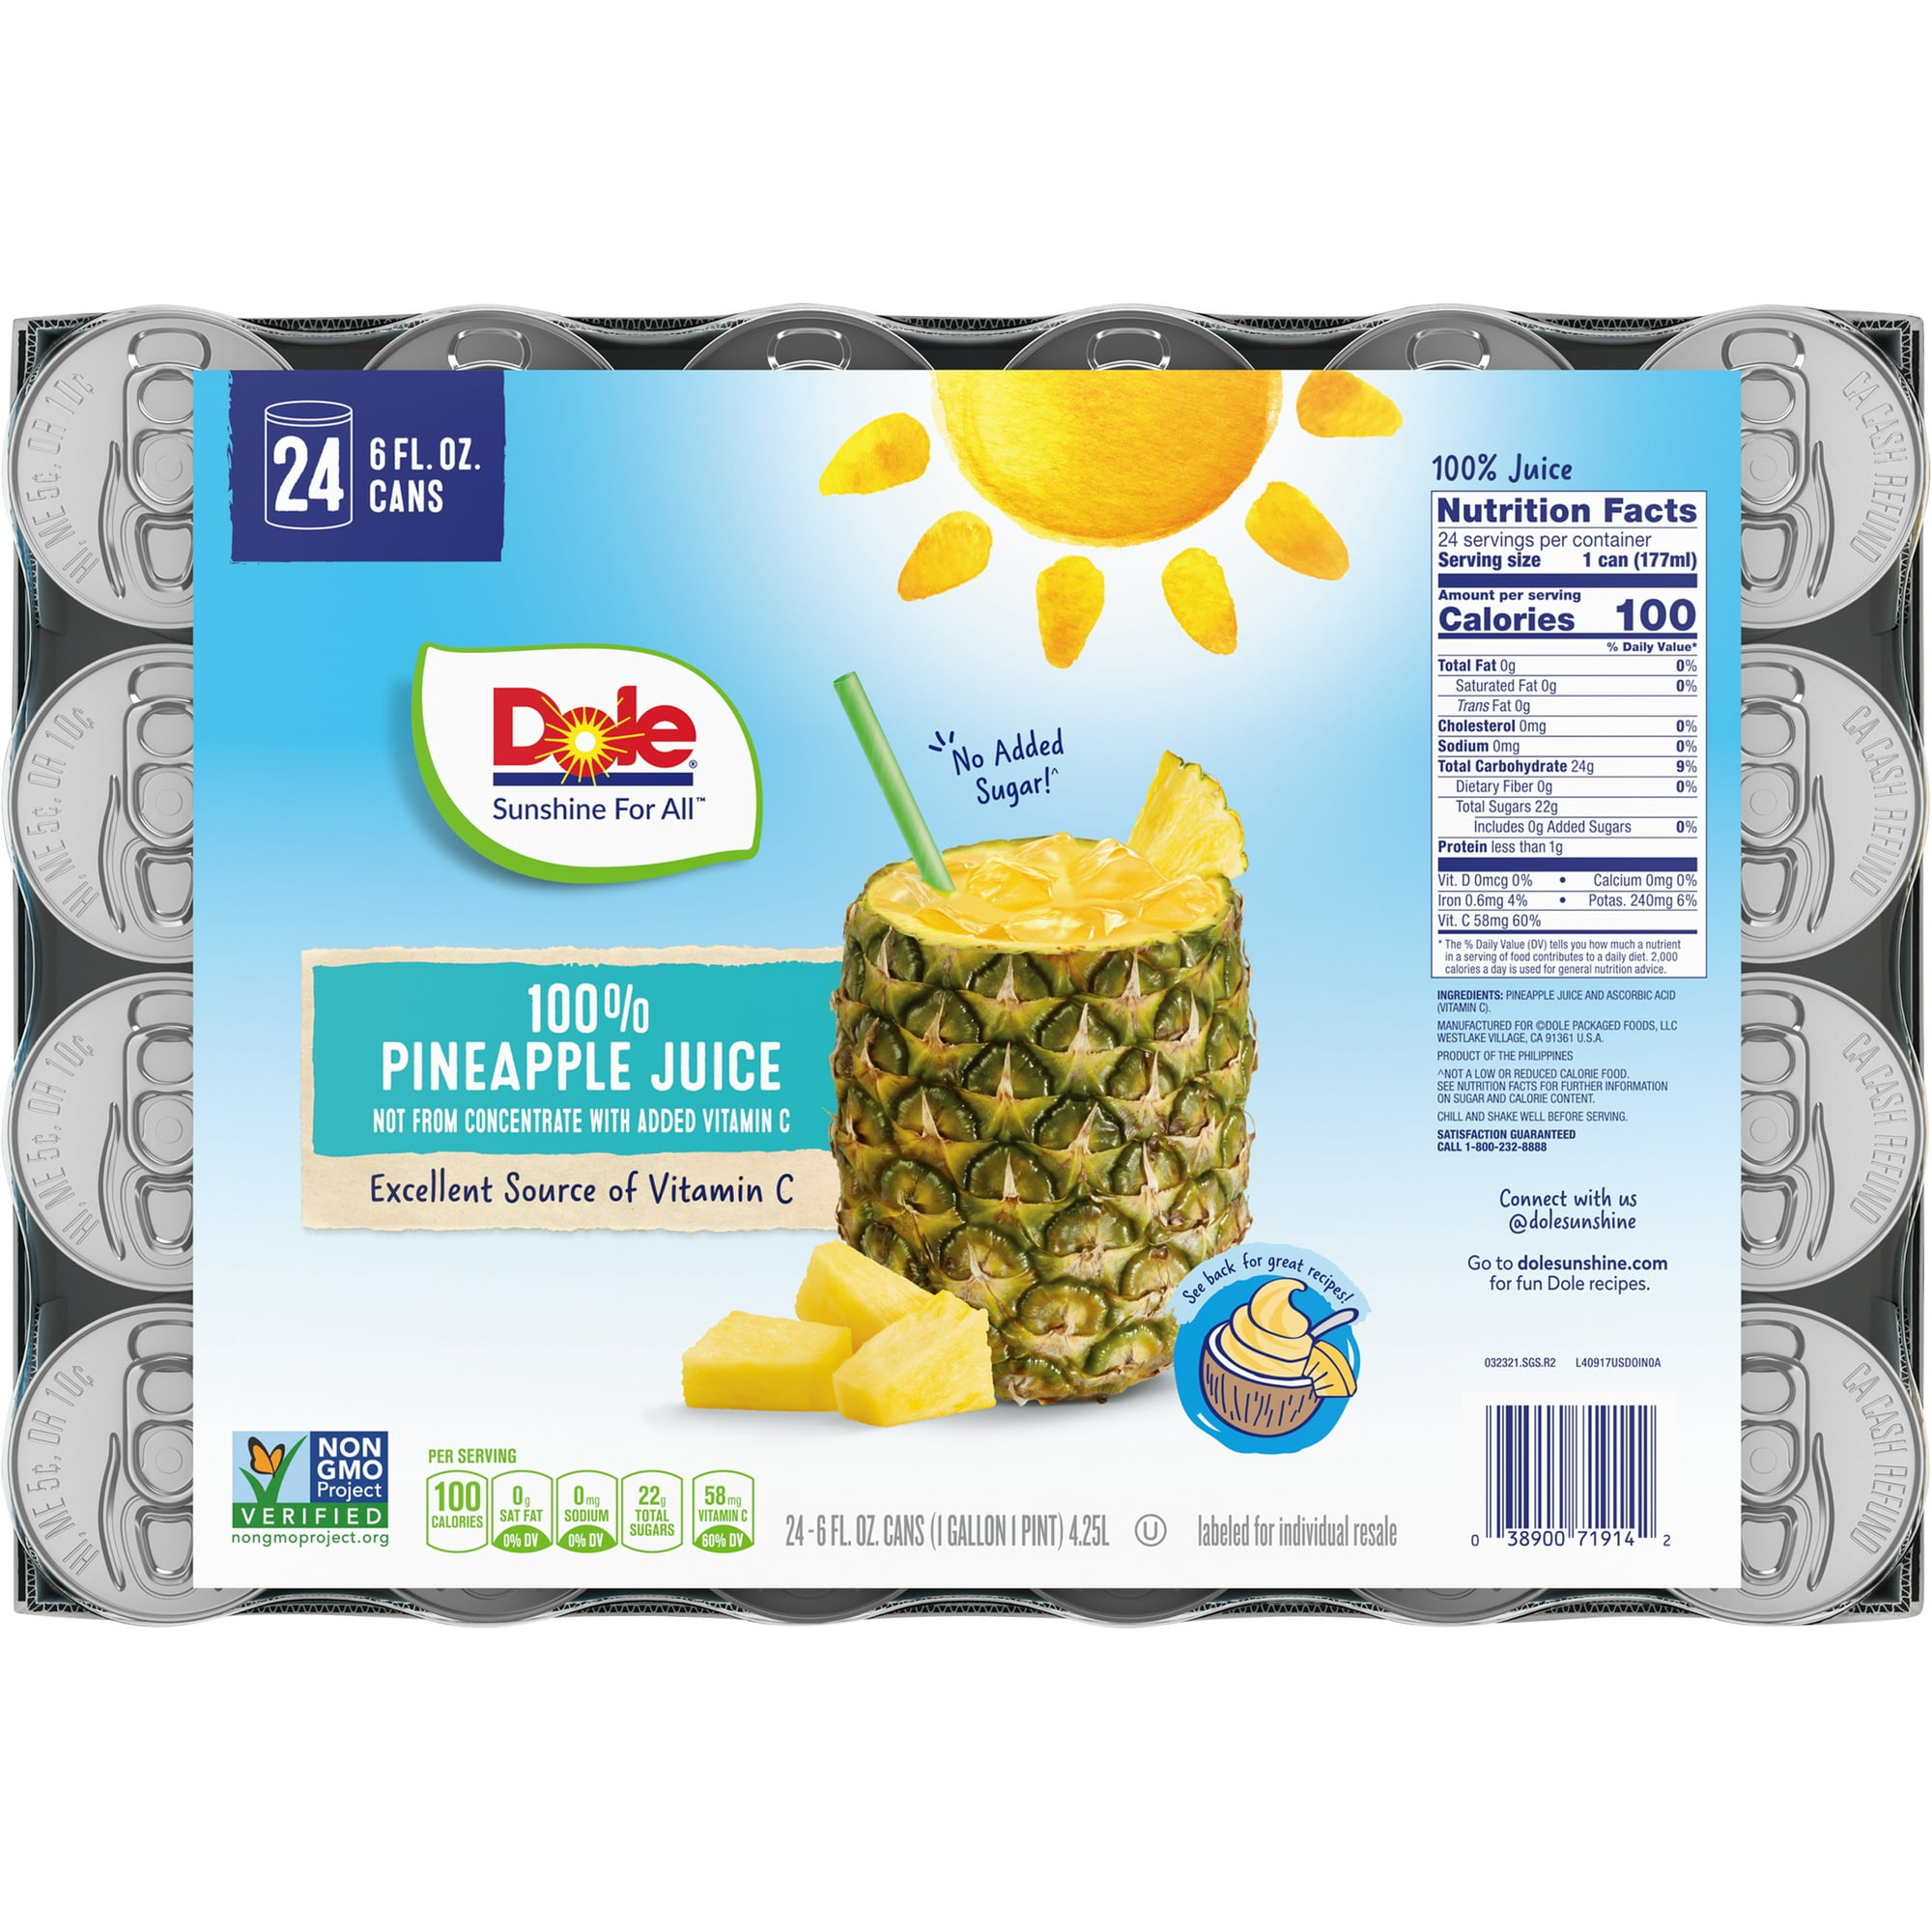 24-Count 6-Oz Dole All Natural 100% Pineapple Juice Cans $10.70 + Free S&H w/ Walmart+ or $35+